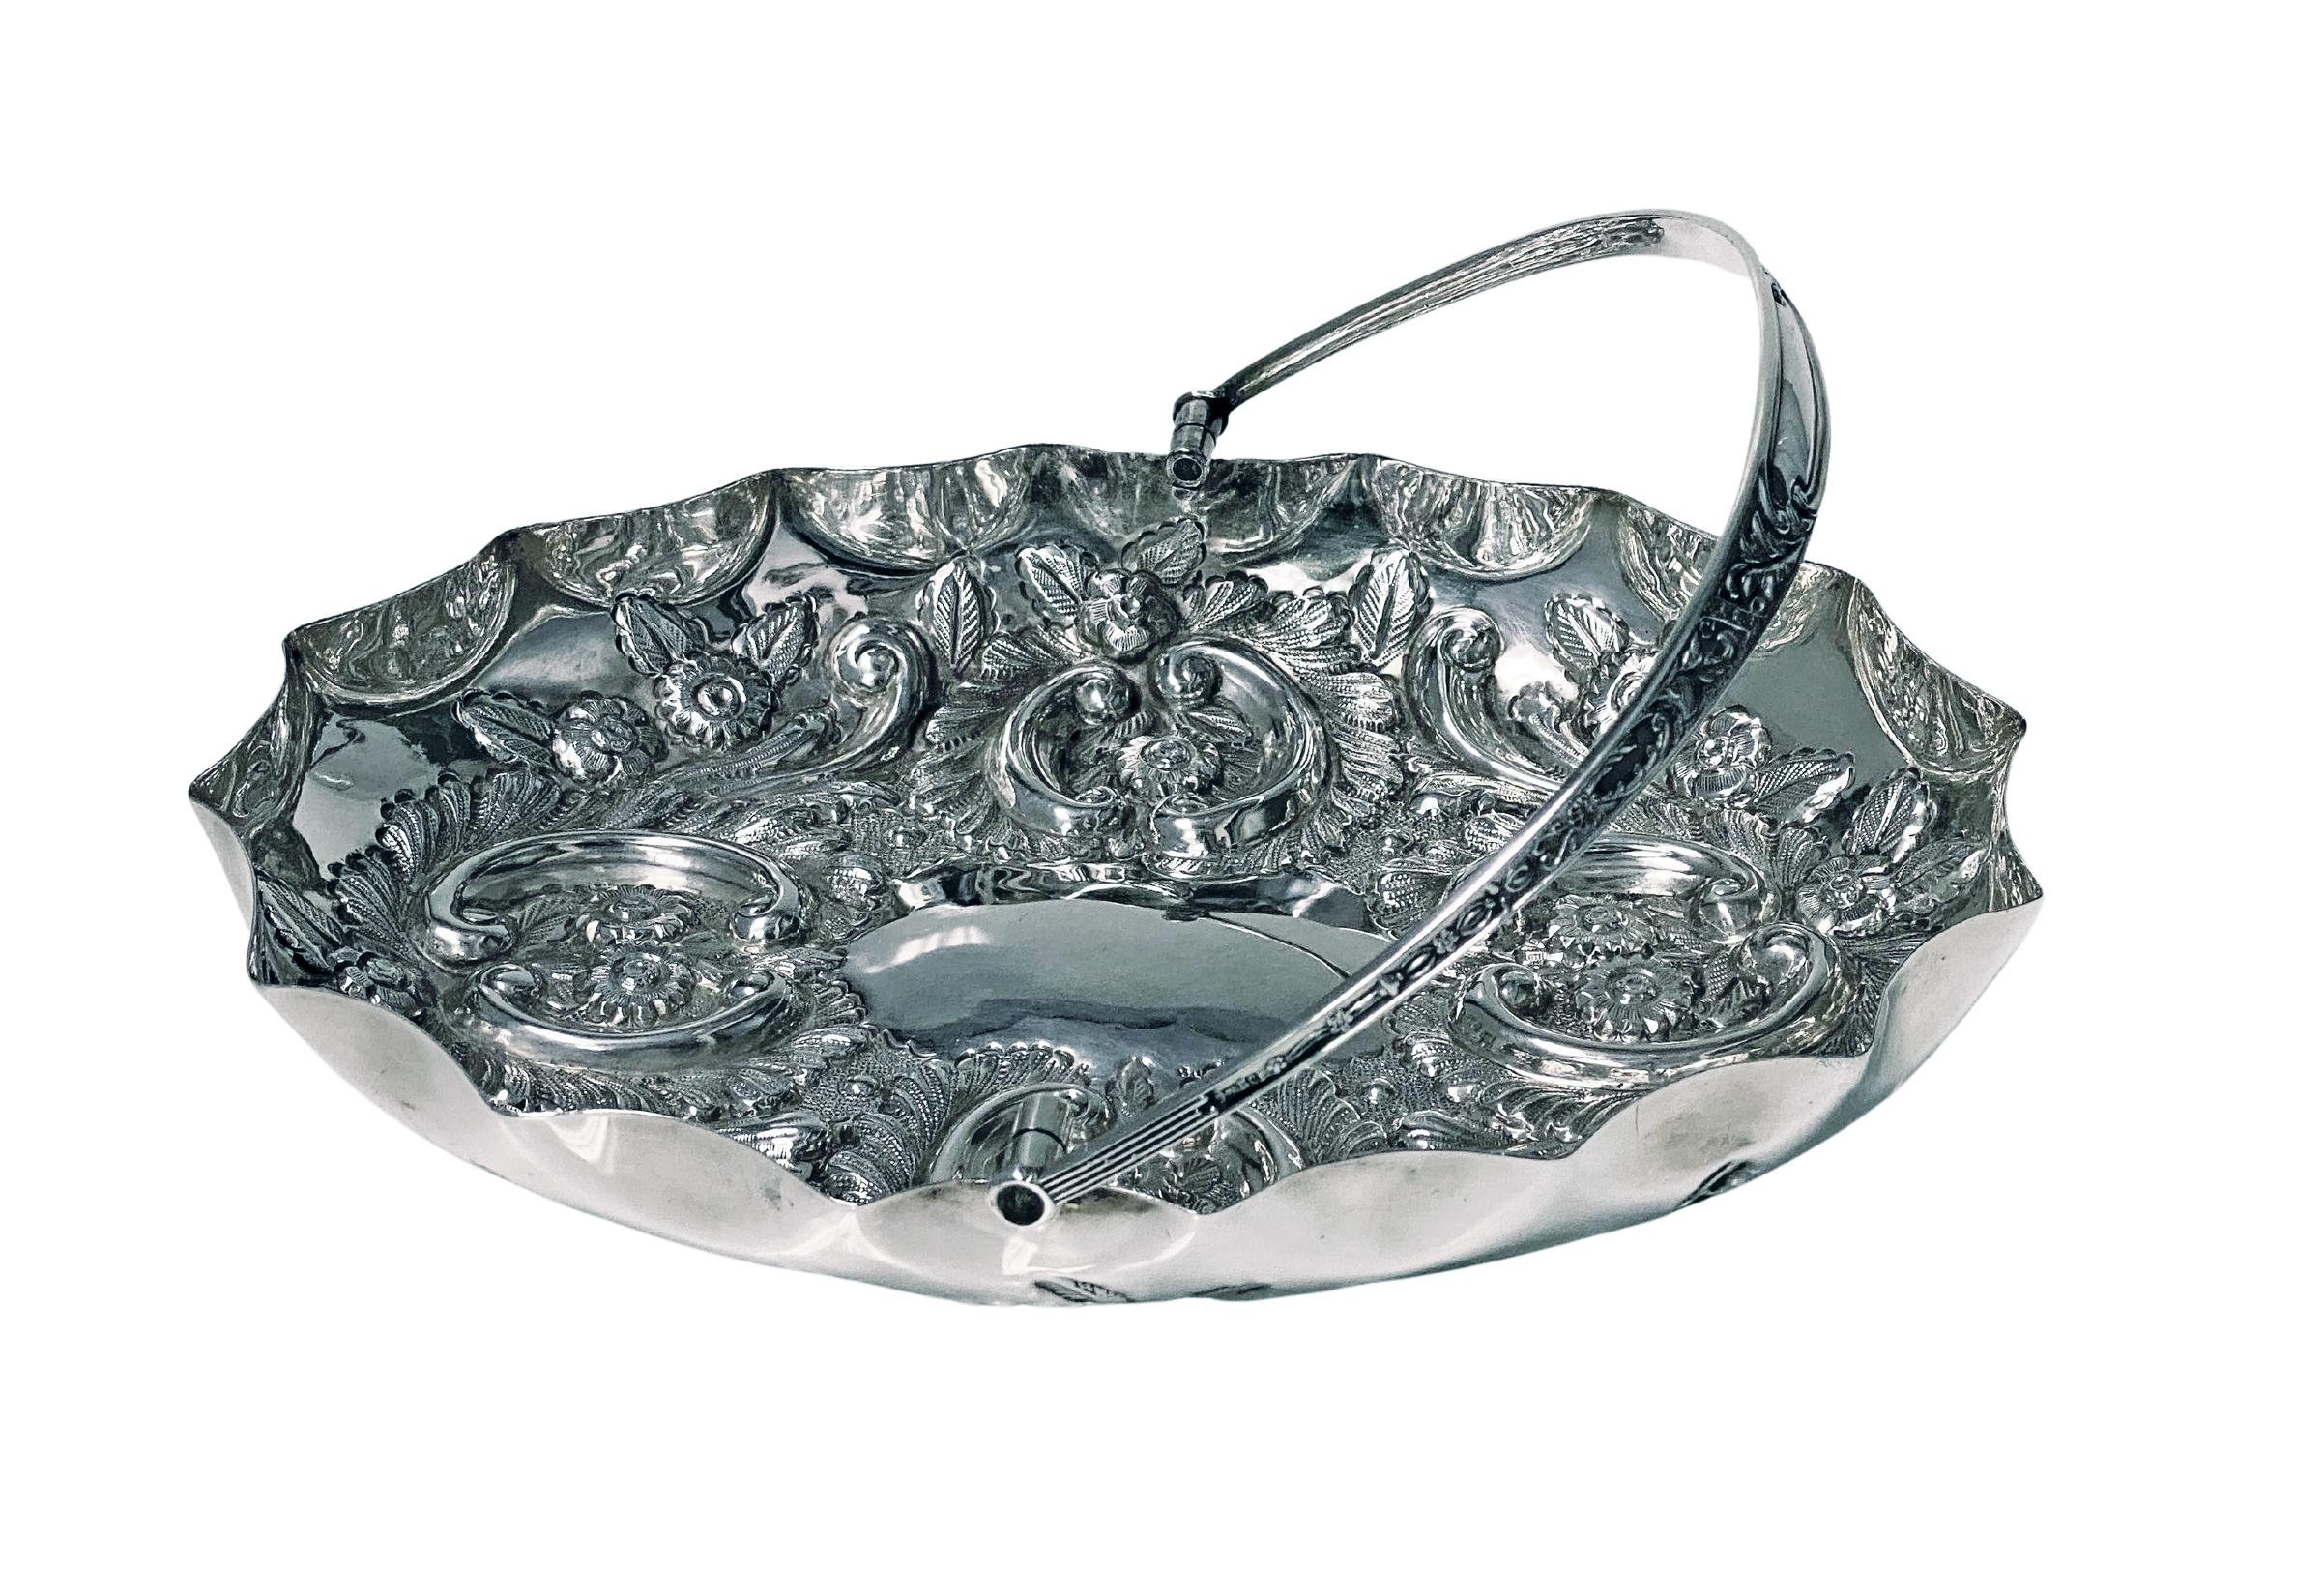 Antique English Sterling Silver Fruit Basket Birmingham 1902 In Good Condition For Sale In Toronto, Ontario